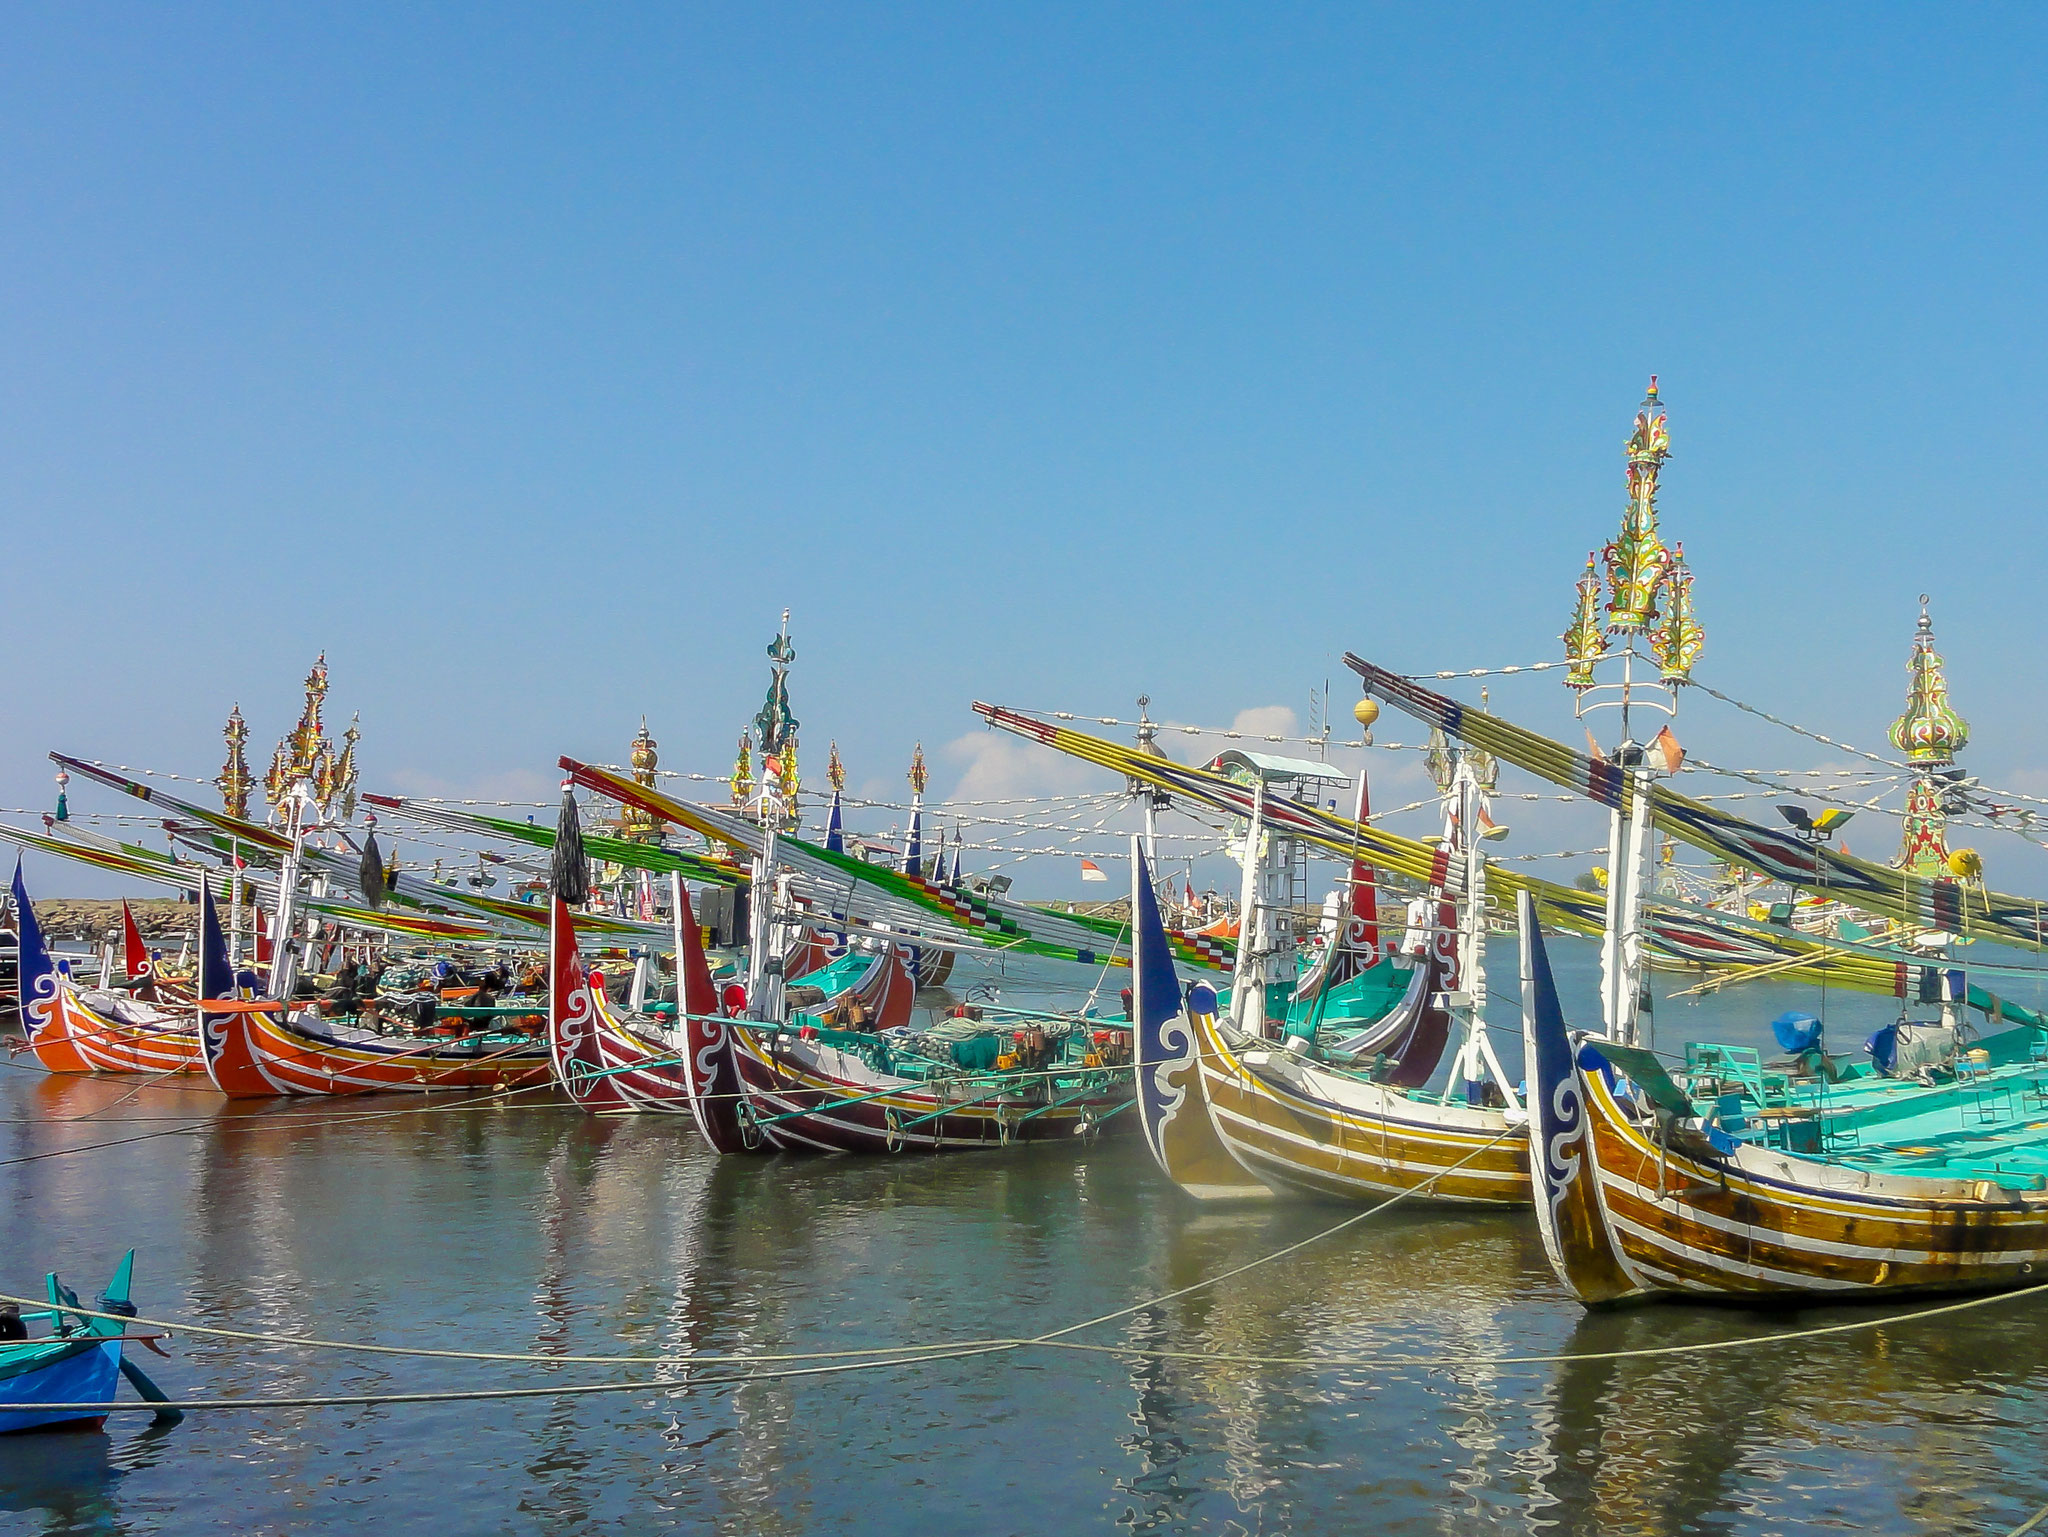 Culture in West Bali, fishing boats